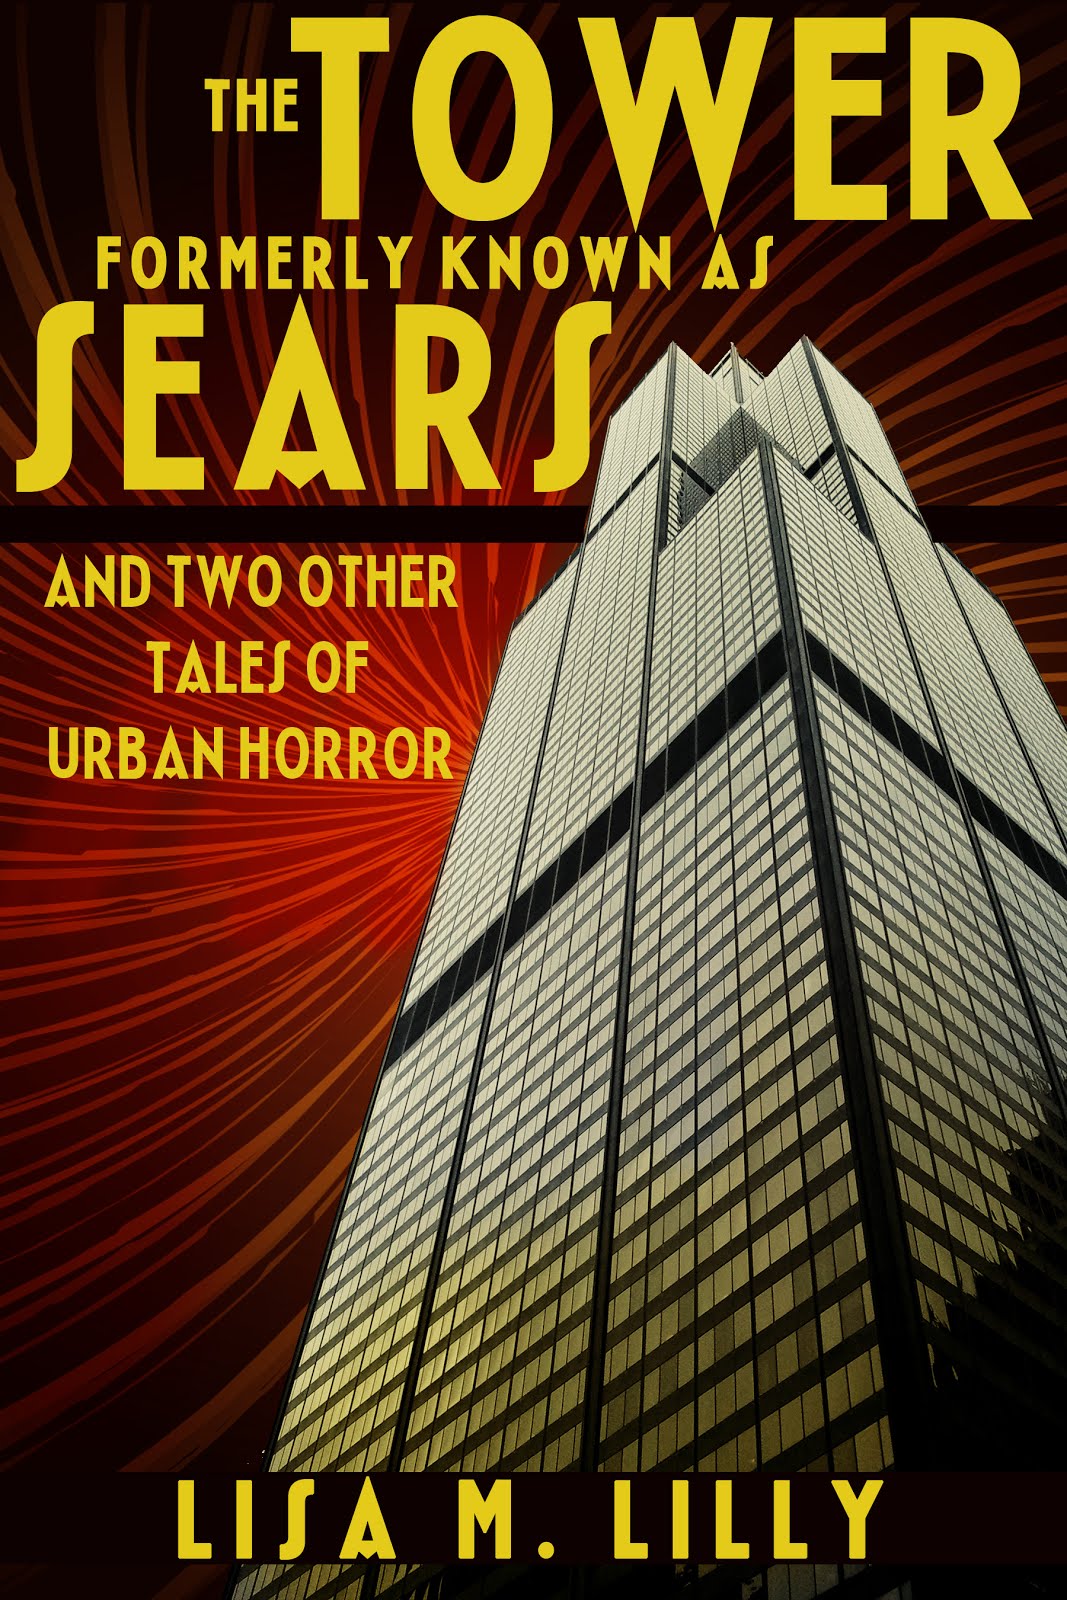 The Tower Formerly Known as Sears and Two Other Tales of Urban Horror by Lisa M. Lilly